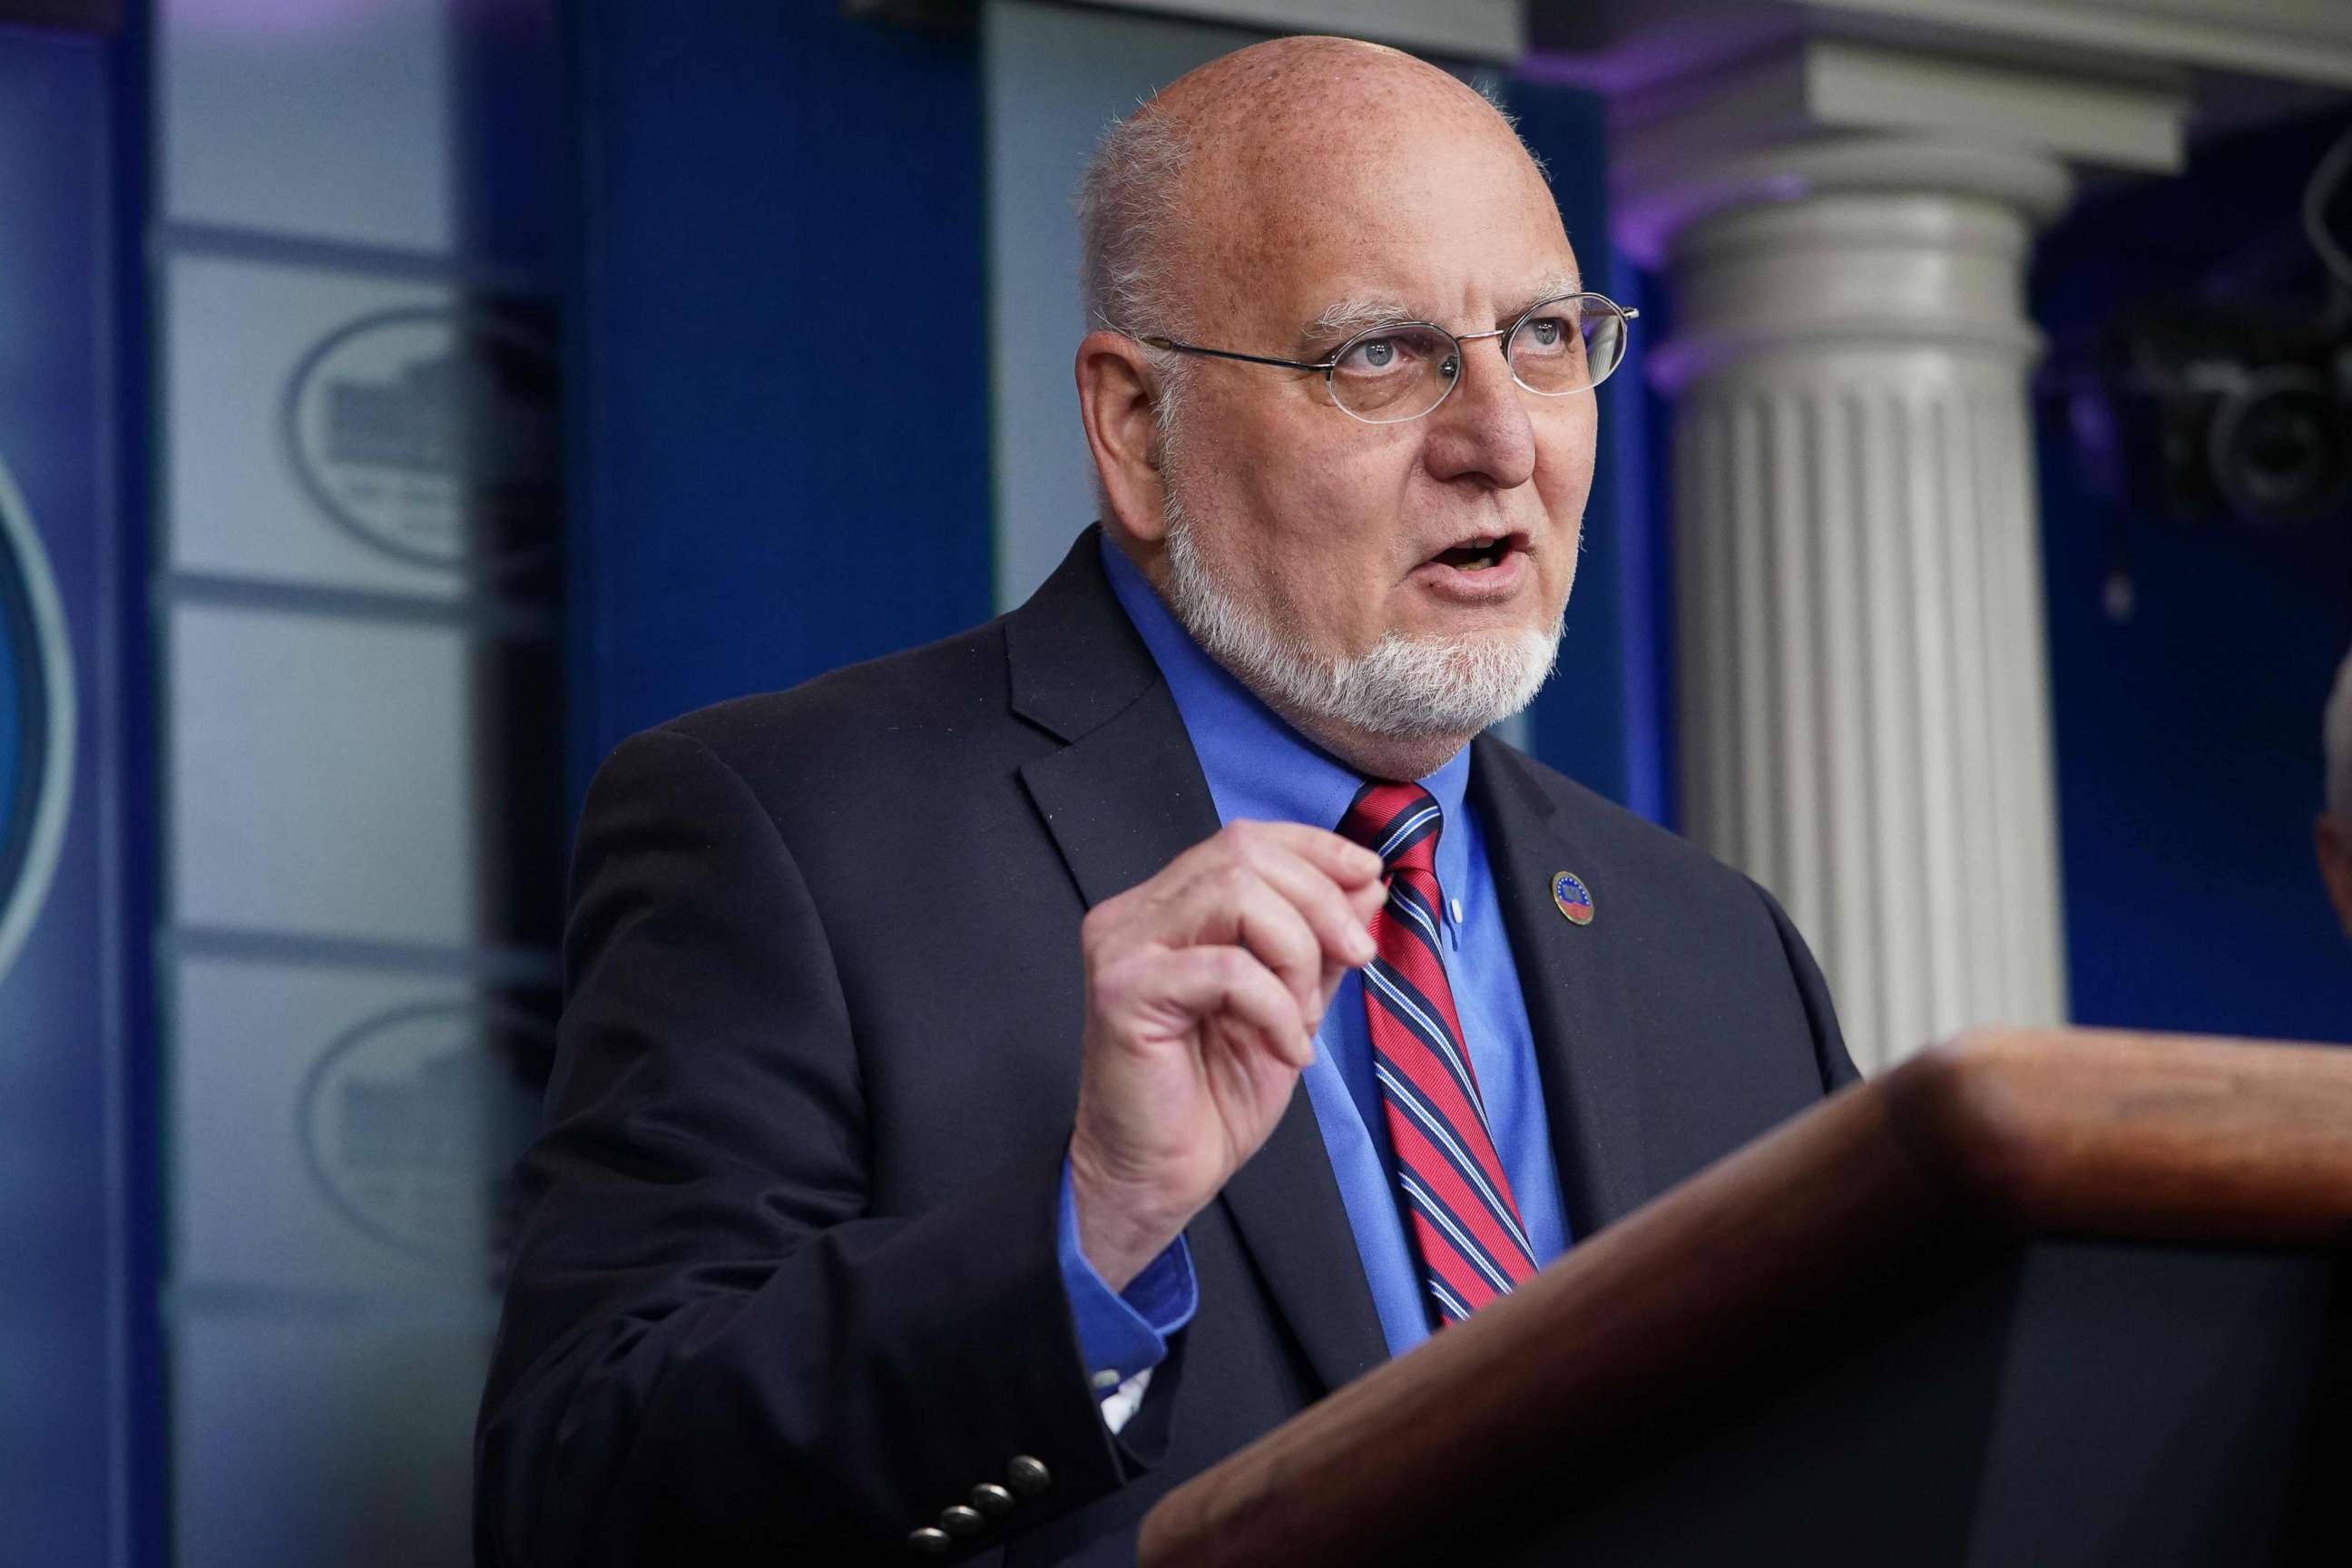 PHOTO: CDC Director Robert Redfield speaks during the daily briefing on the novel coronavirus, which causes COVID-19, in the Brady Briefing Room of the White House on April 22, 2020, in Washington.